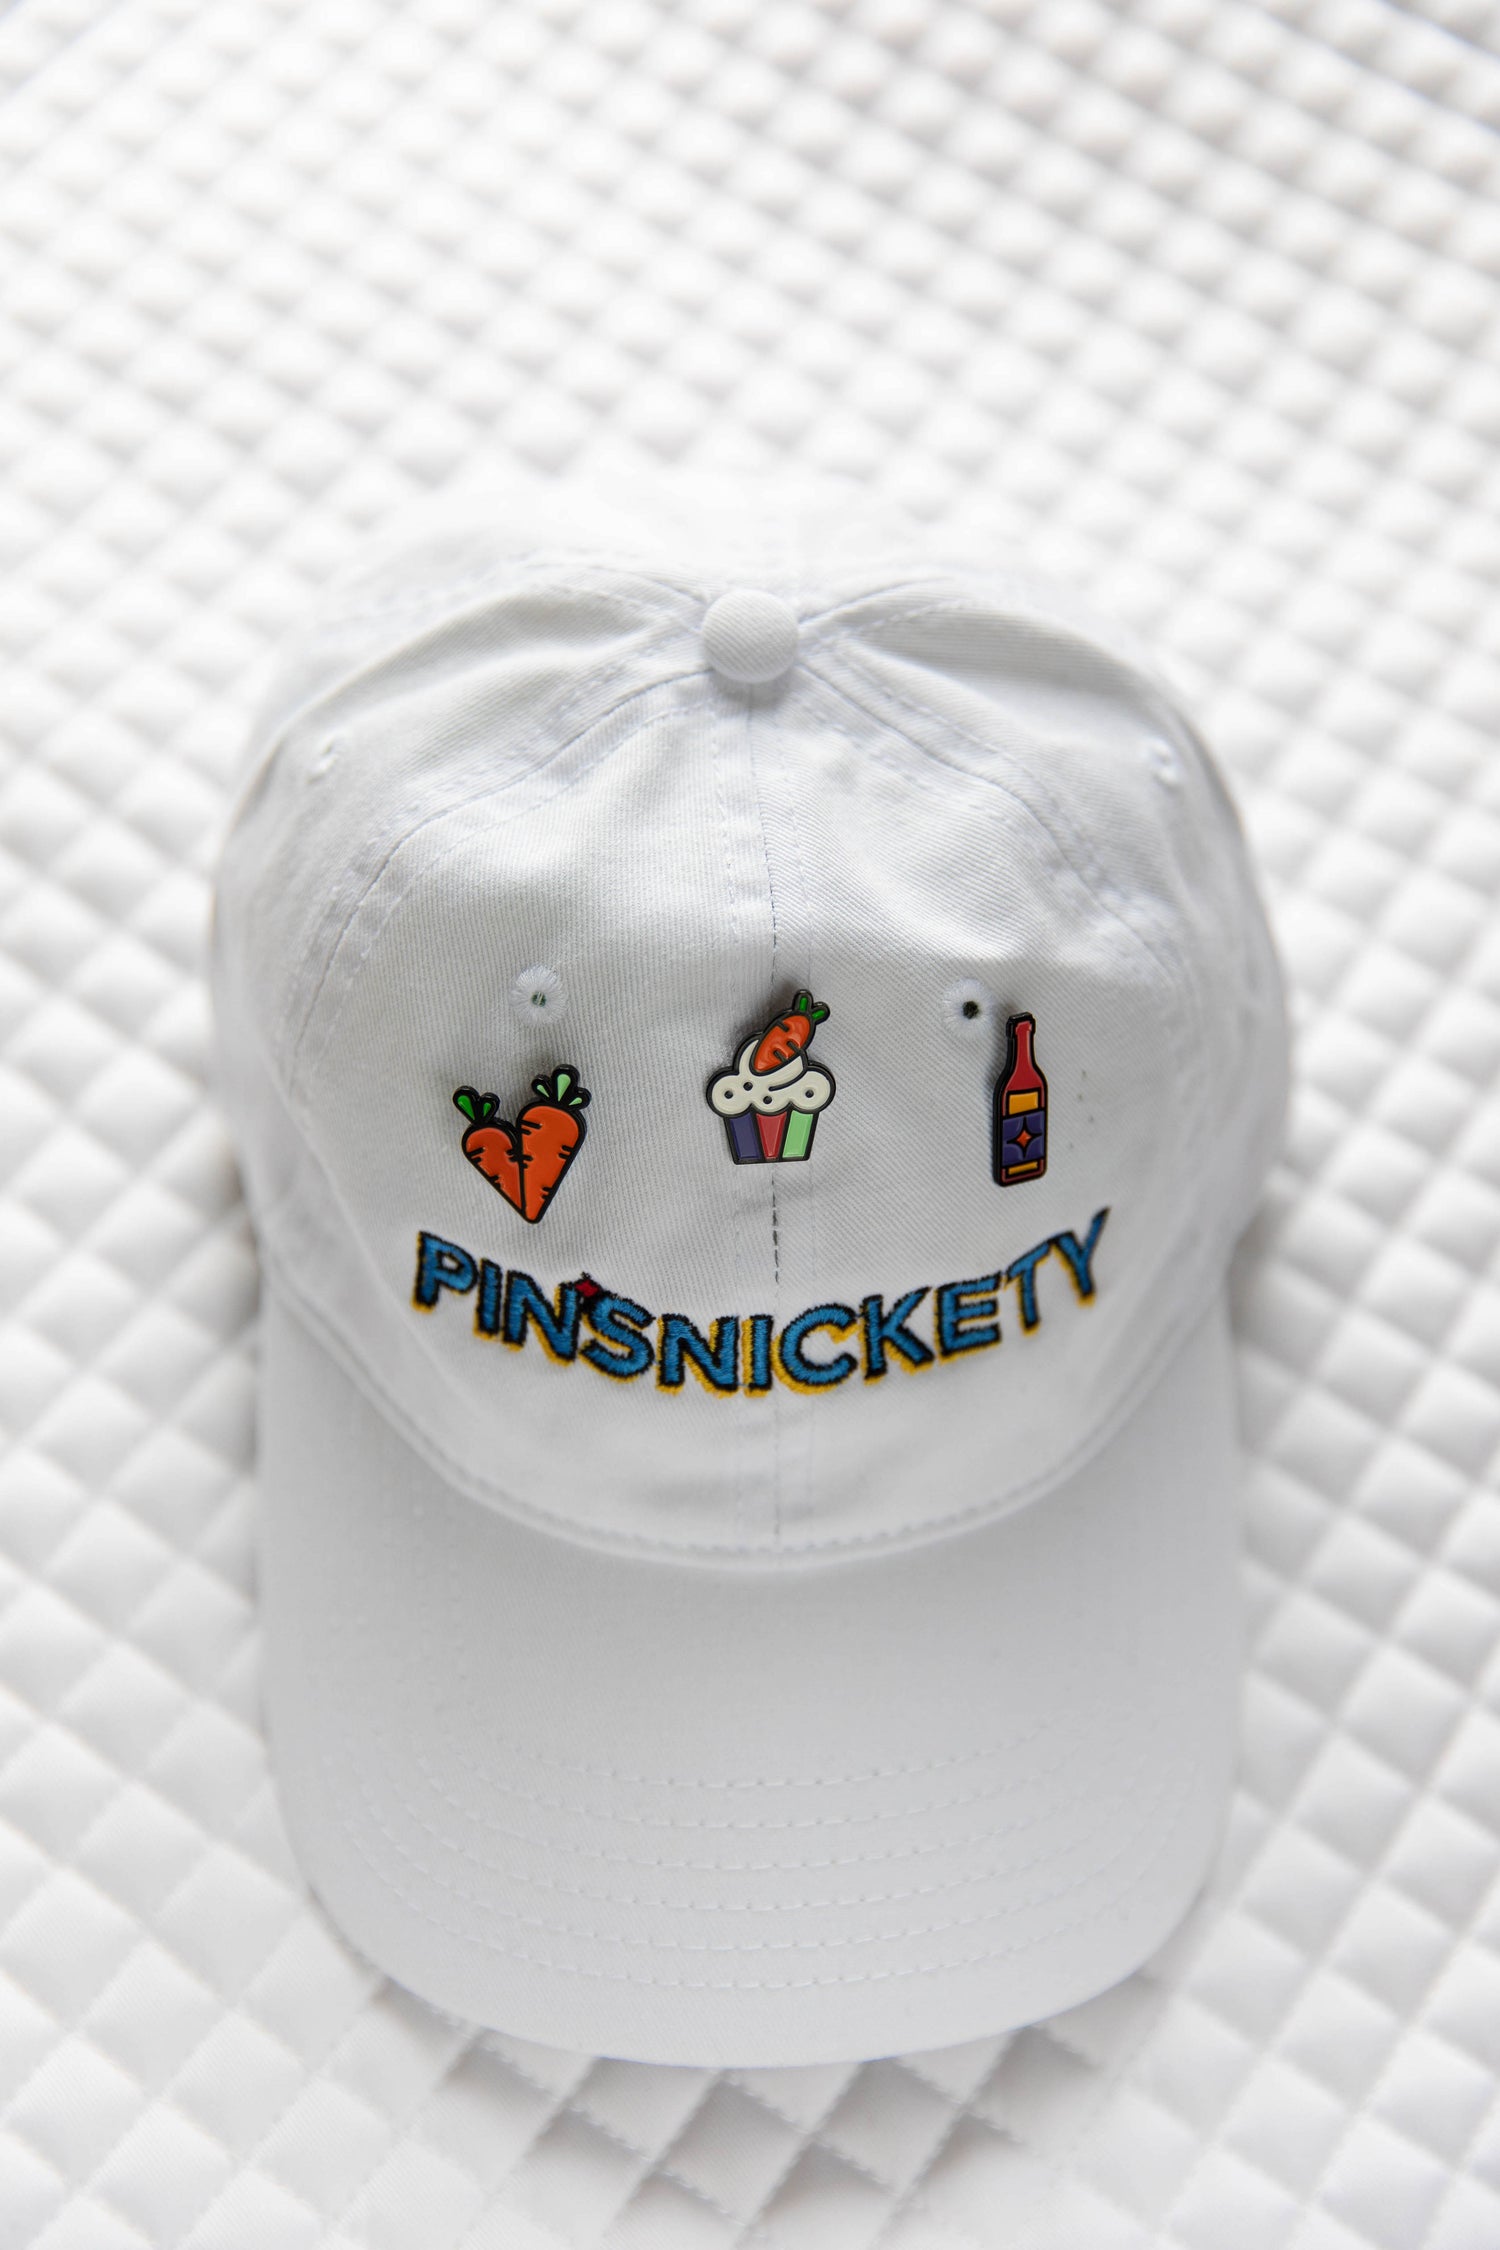 Pinsnickety Packs